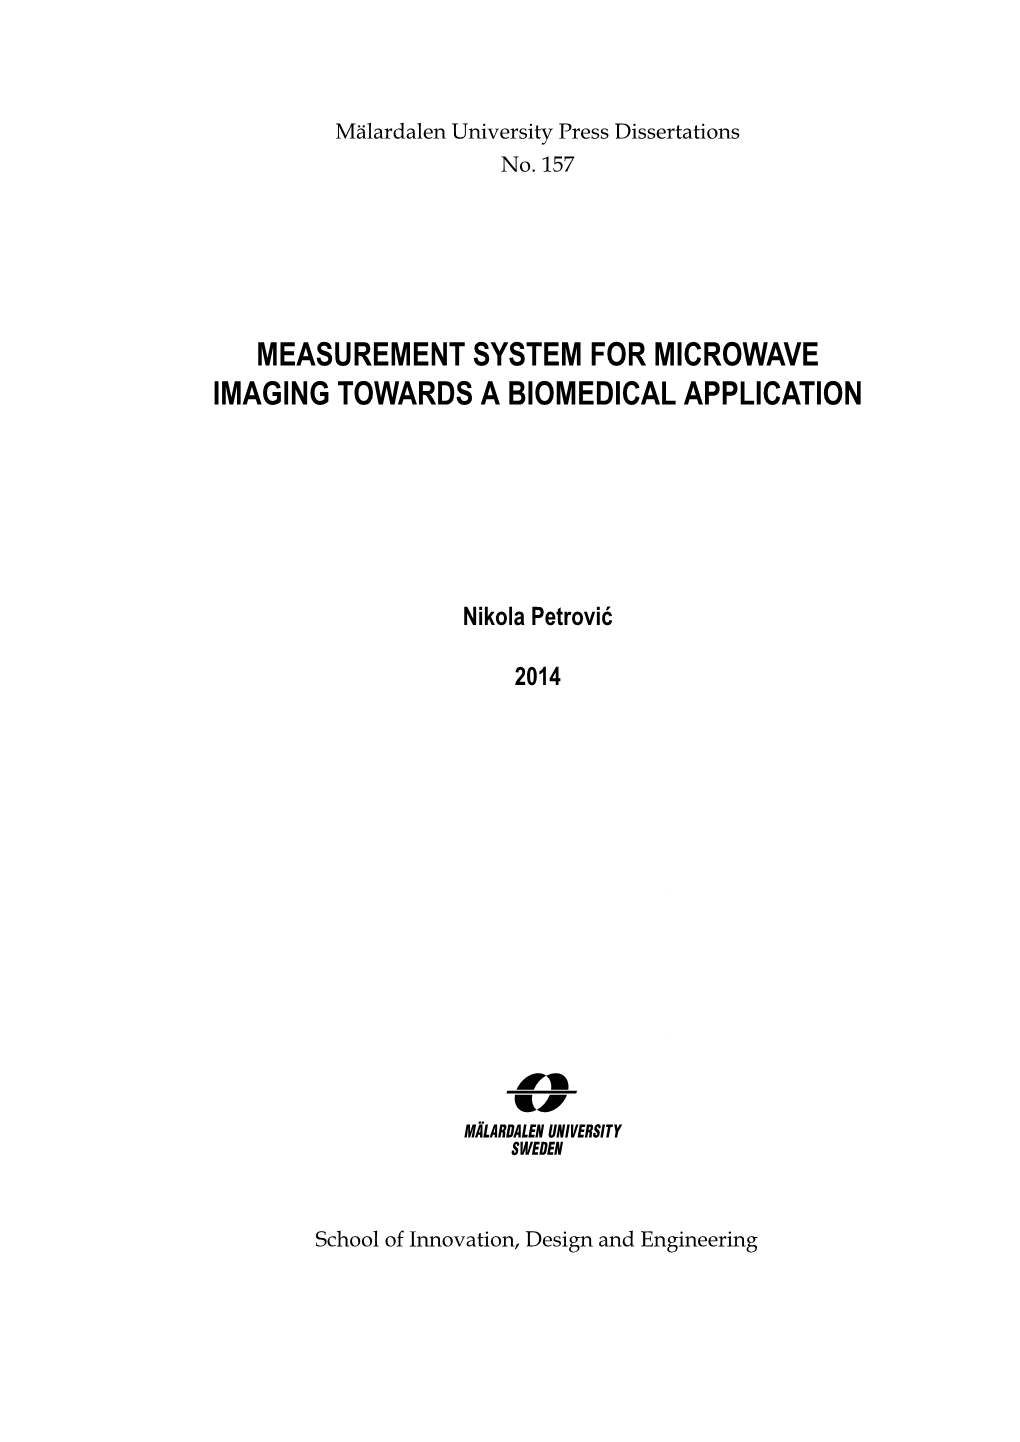 Measurement System for Microwave Imaging Towards a Biomedical Application